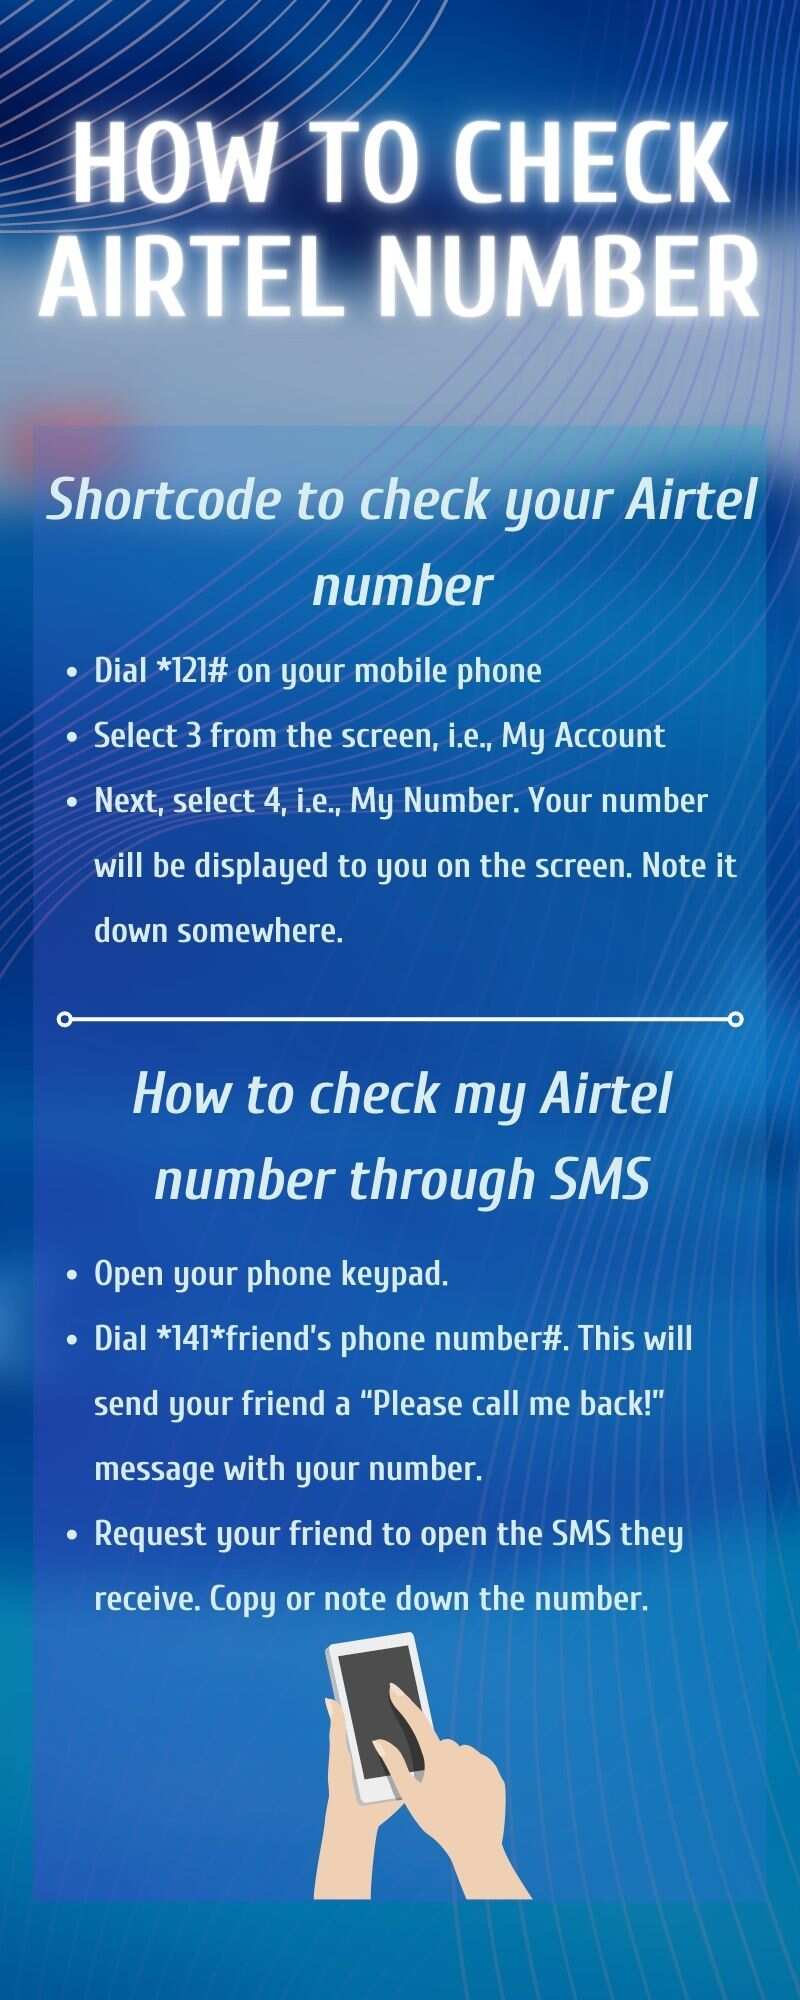 How to check Airtel number on my phone